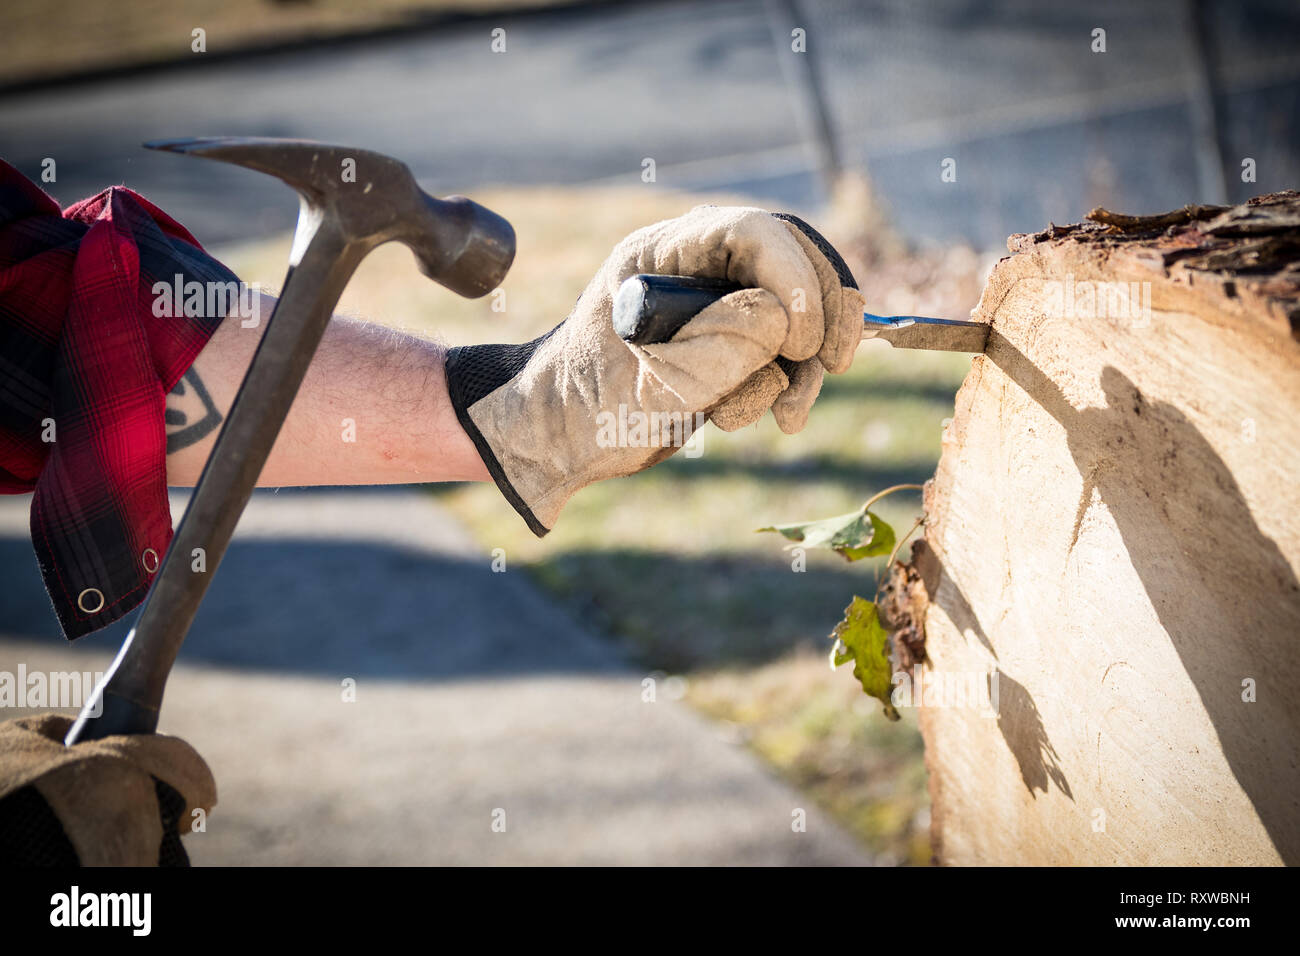 Man's hands in work gloves using hammer and chisel to remove bark from tree stump log. Stock Photo